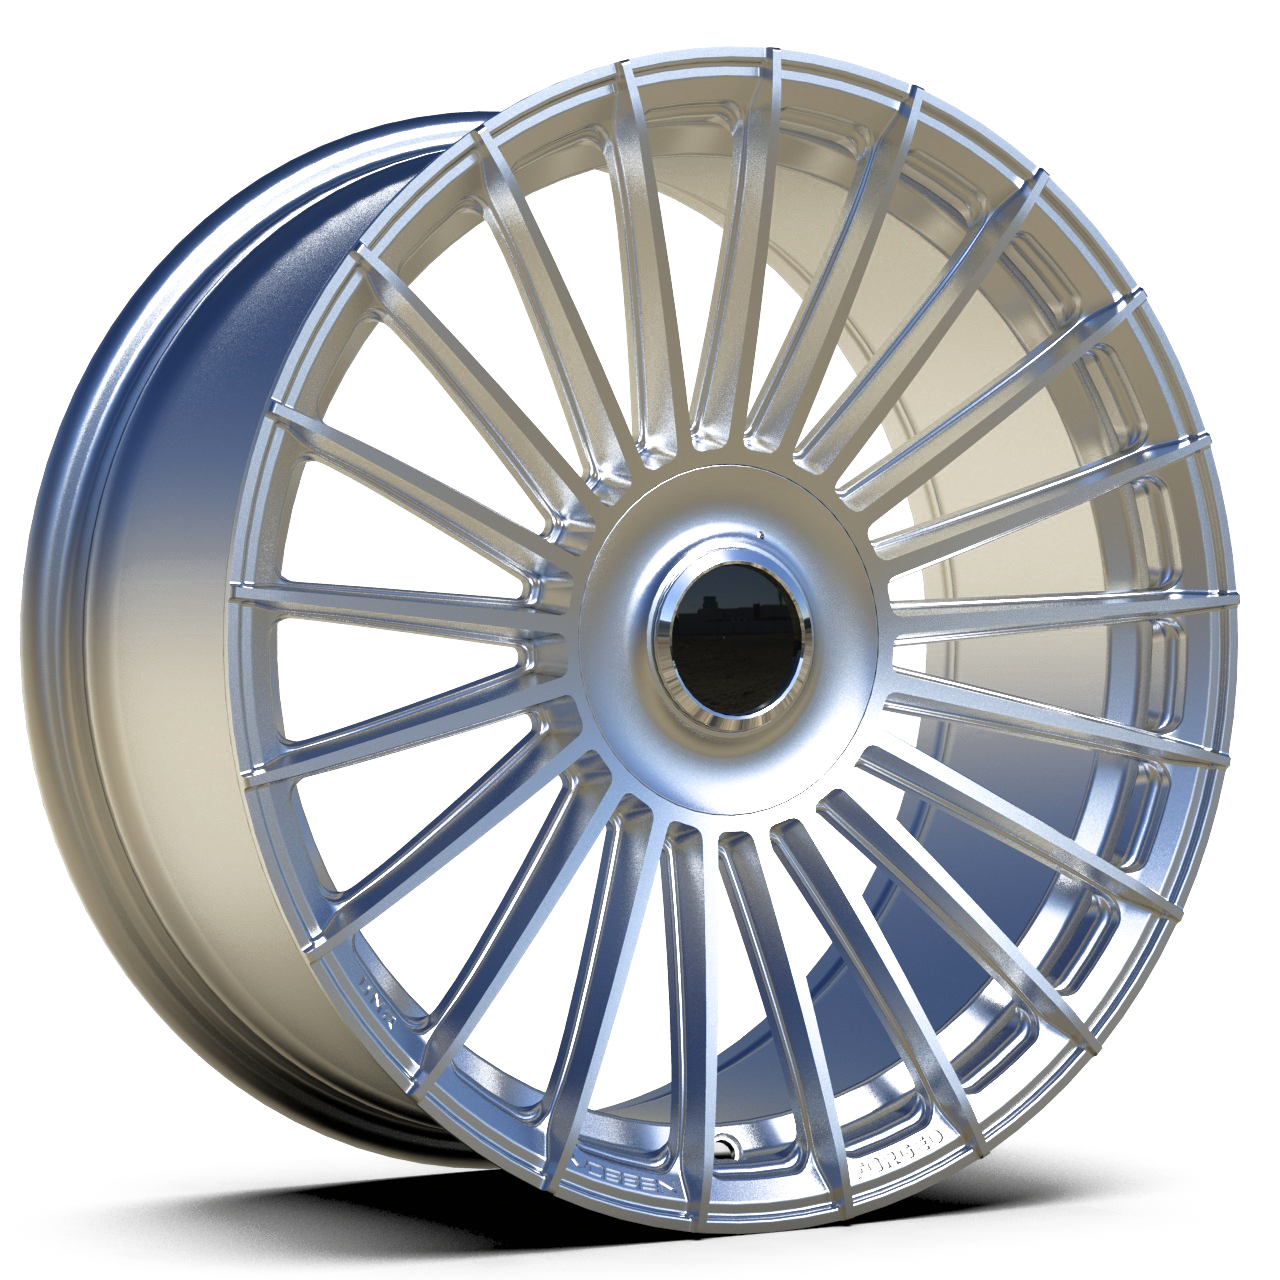 A019 18X8.0 Inch ET 35 Multi Spokes Cast Alloy Wheels From China Wheels Manufacturers